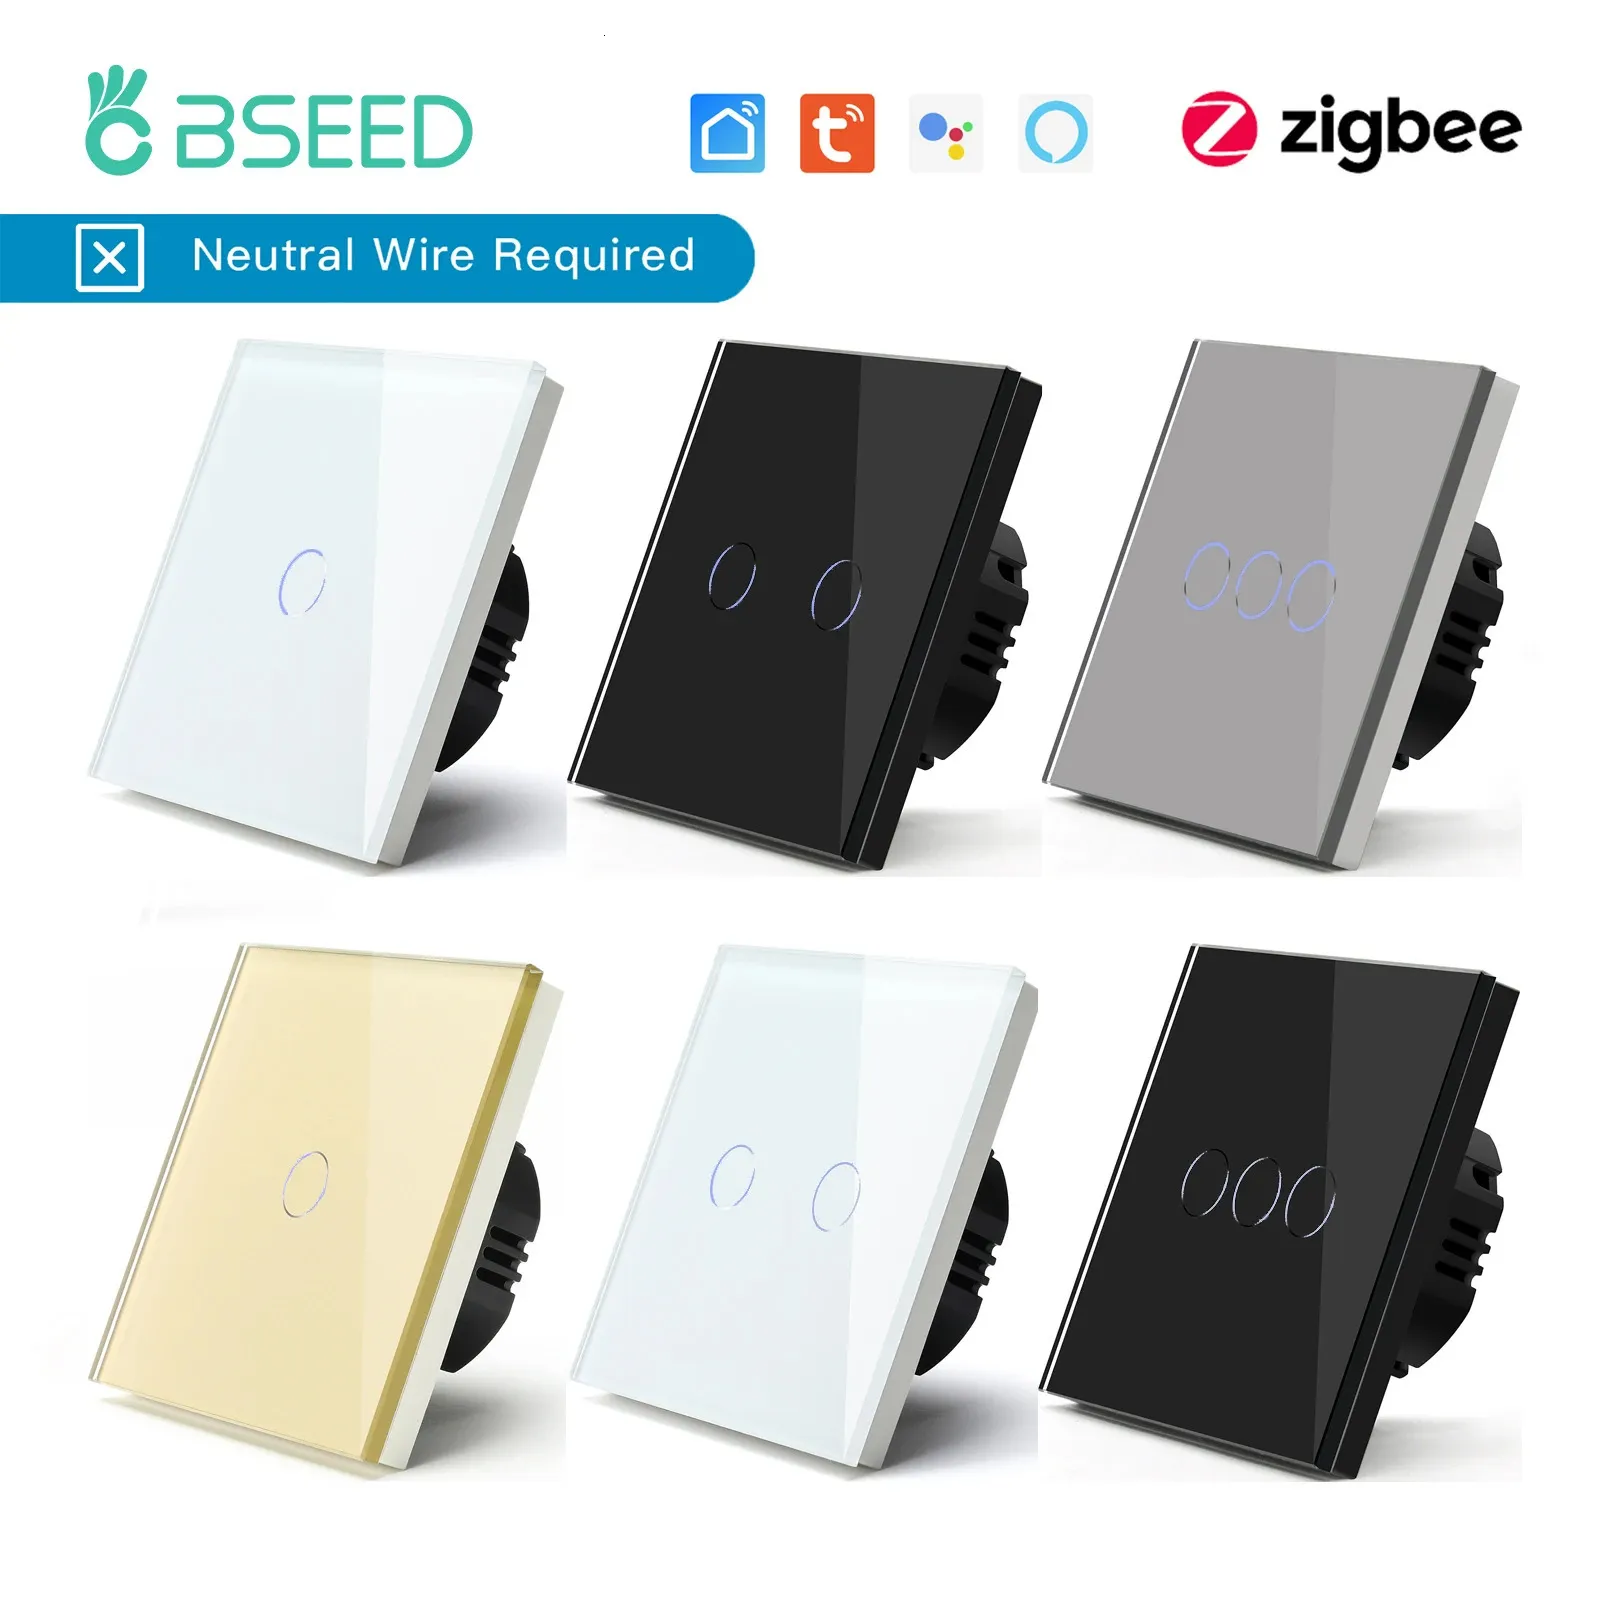 Switches Accessories BSEED Zigbee Wall Light Switch Touch Screen 123Gang Smart Life Google Alexa No Neutral Wire Tuya App Control 231202